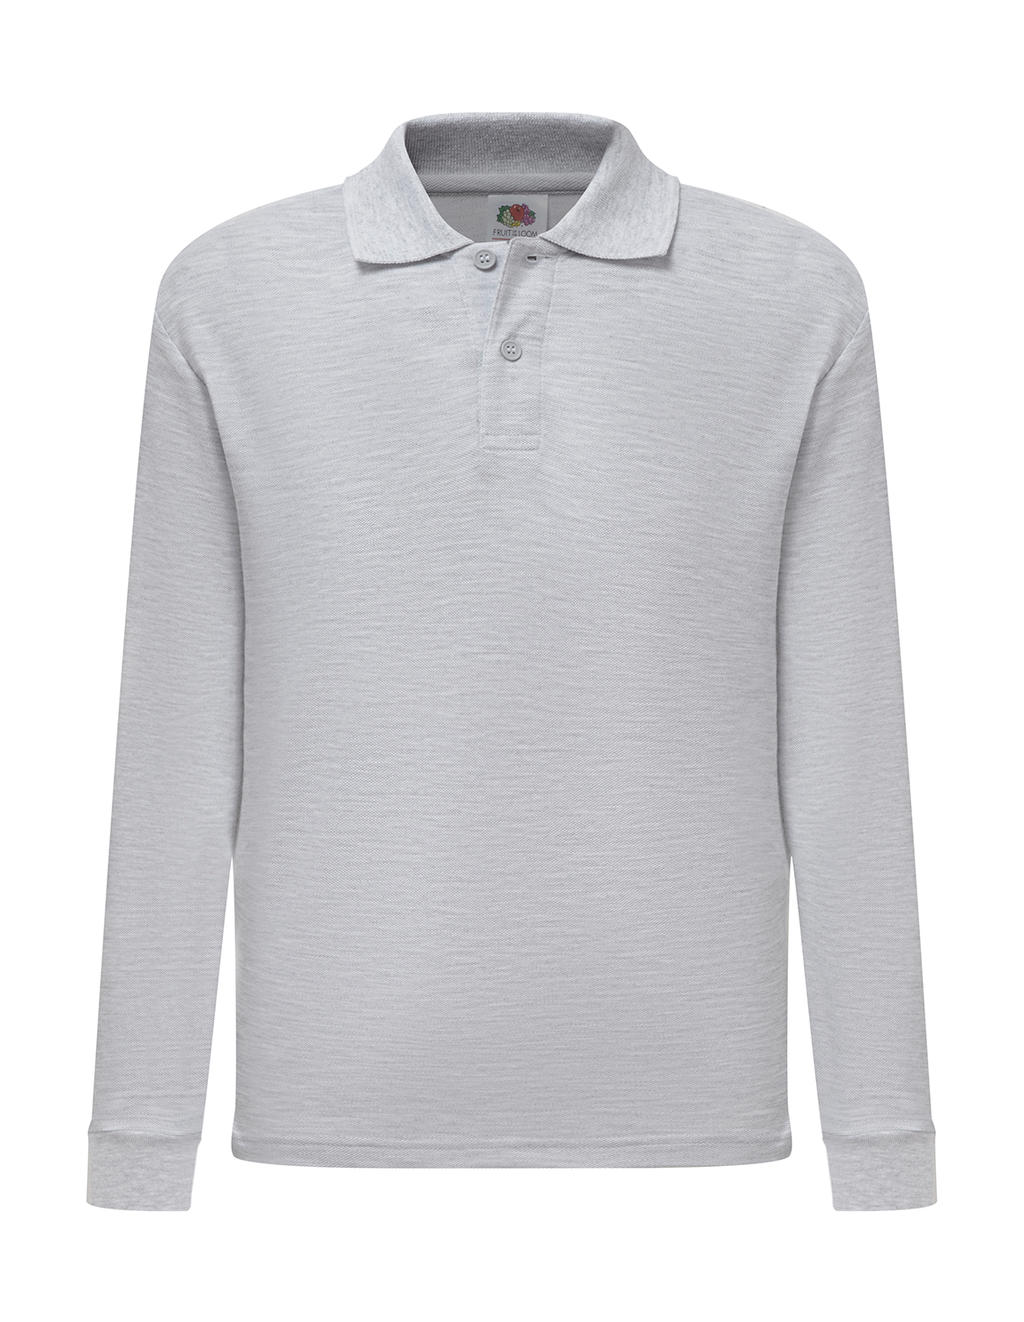  Kids 65/35 Long Sleeve Polo in Farbe Heather Grey